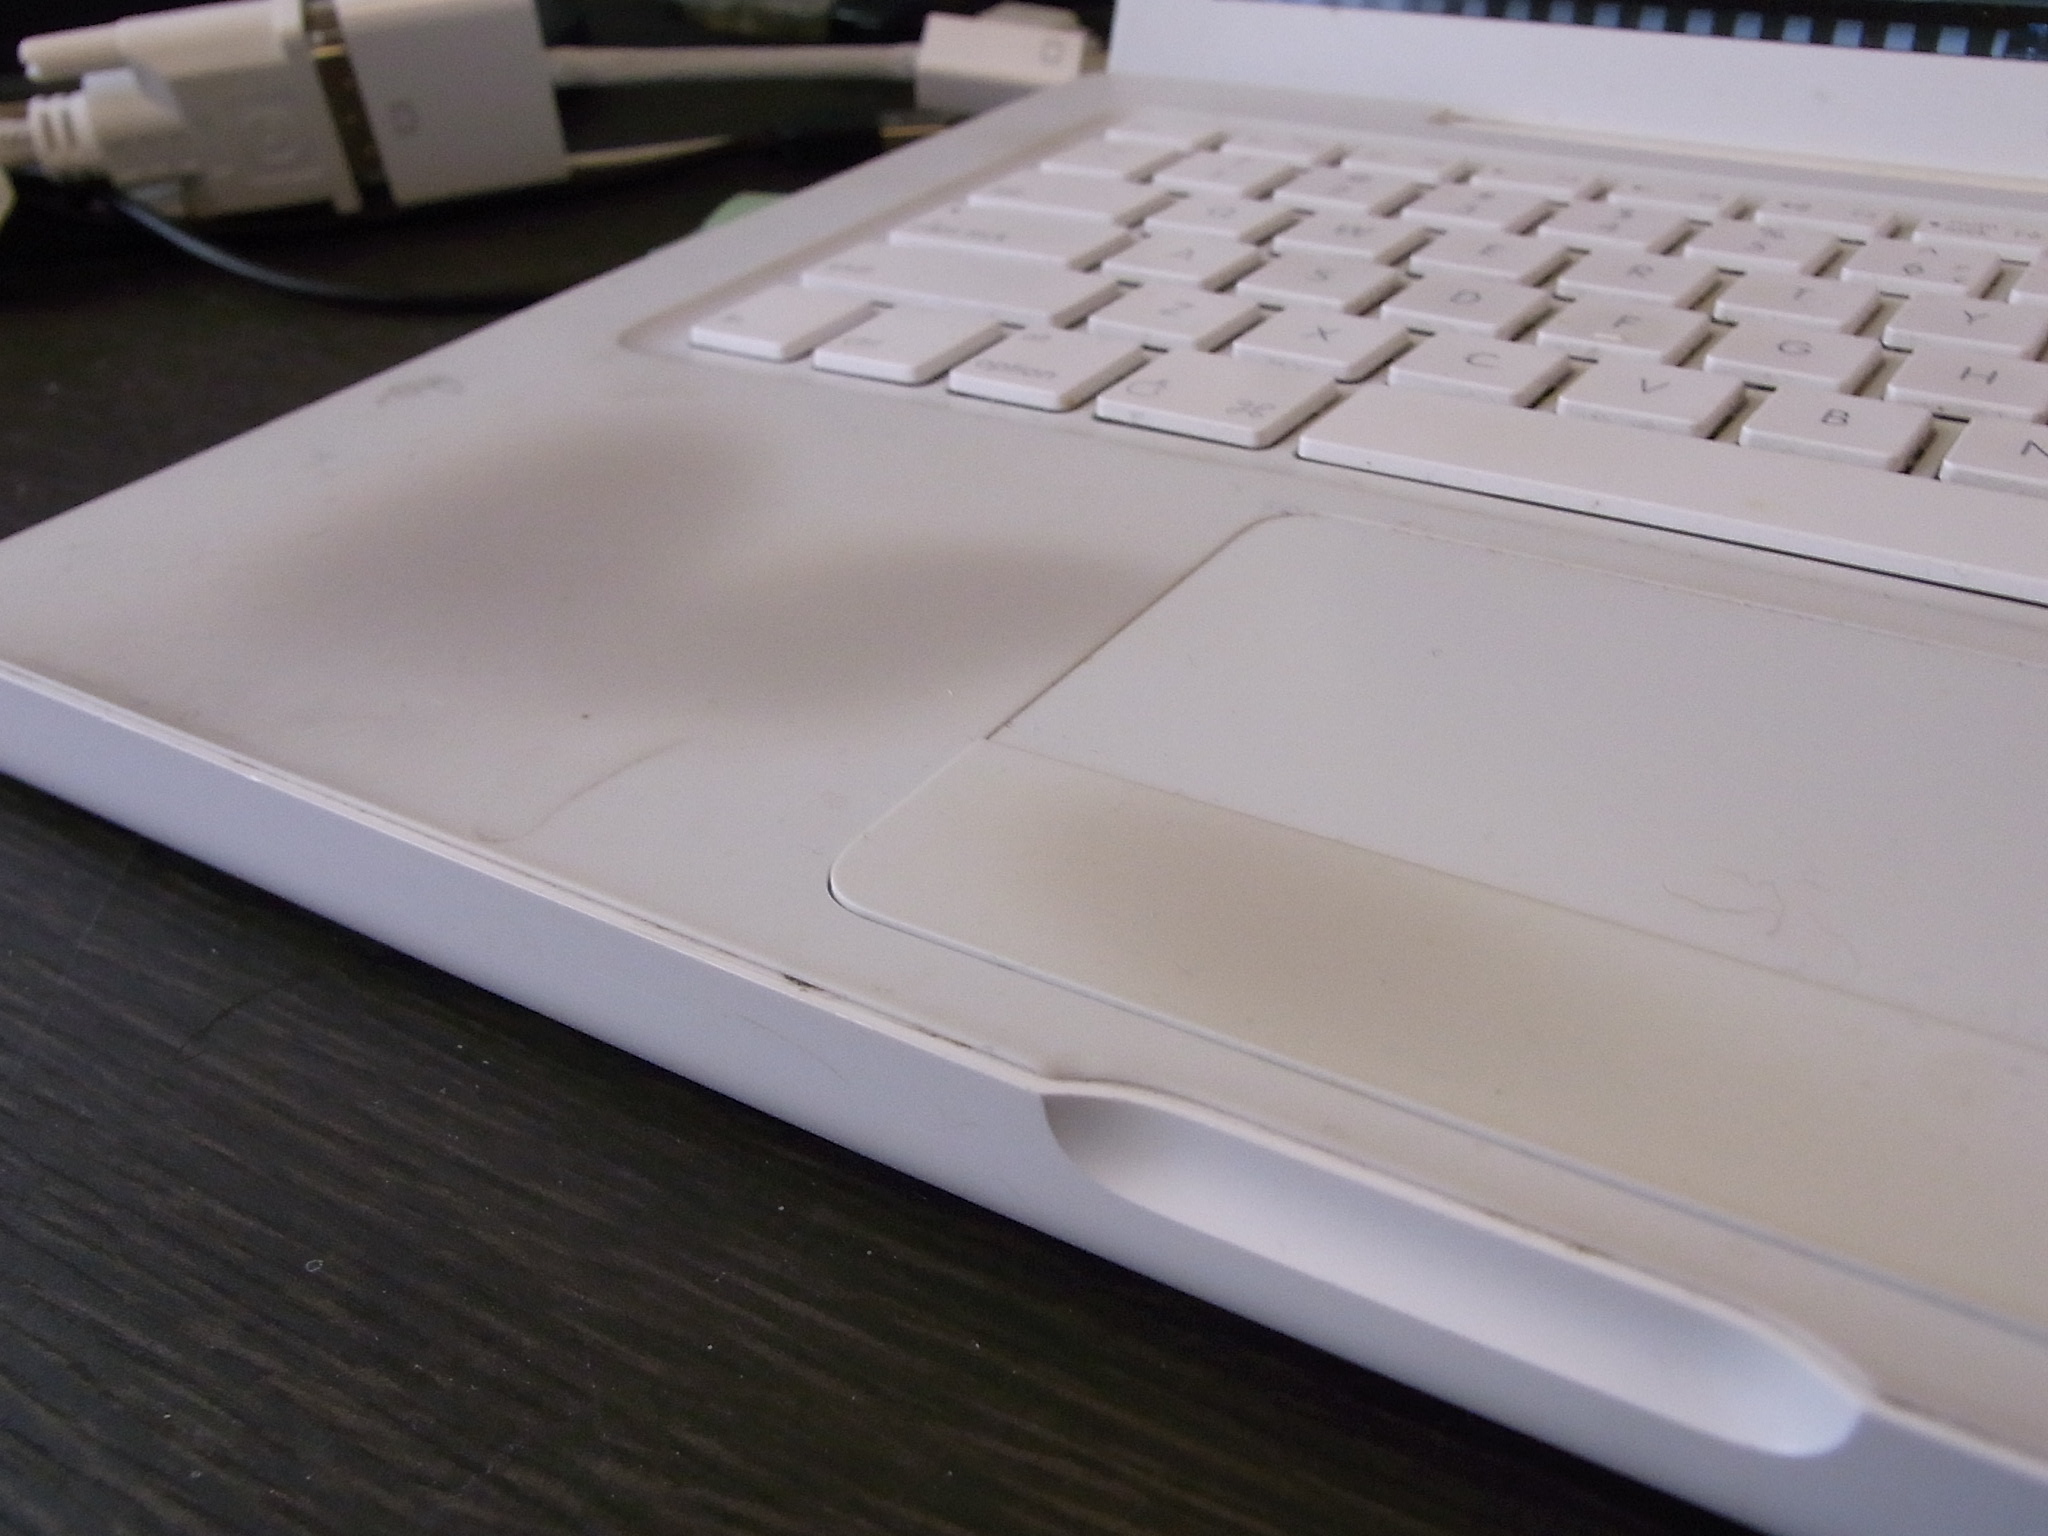 a white laptop with a white keyboard and two yellow wires